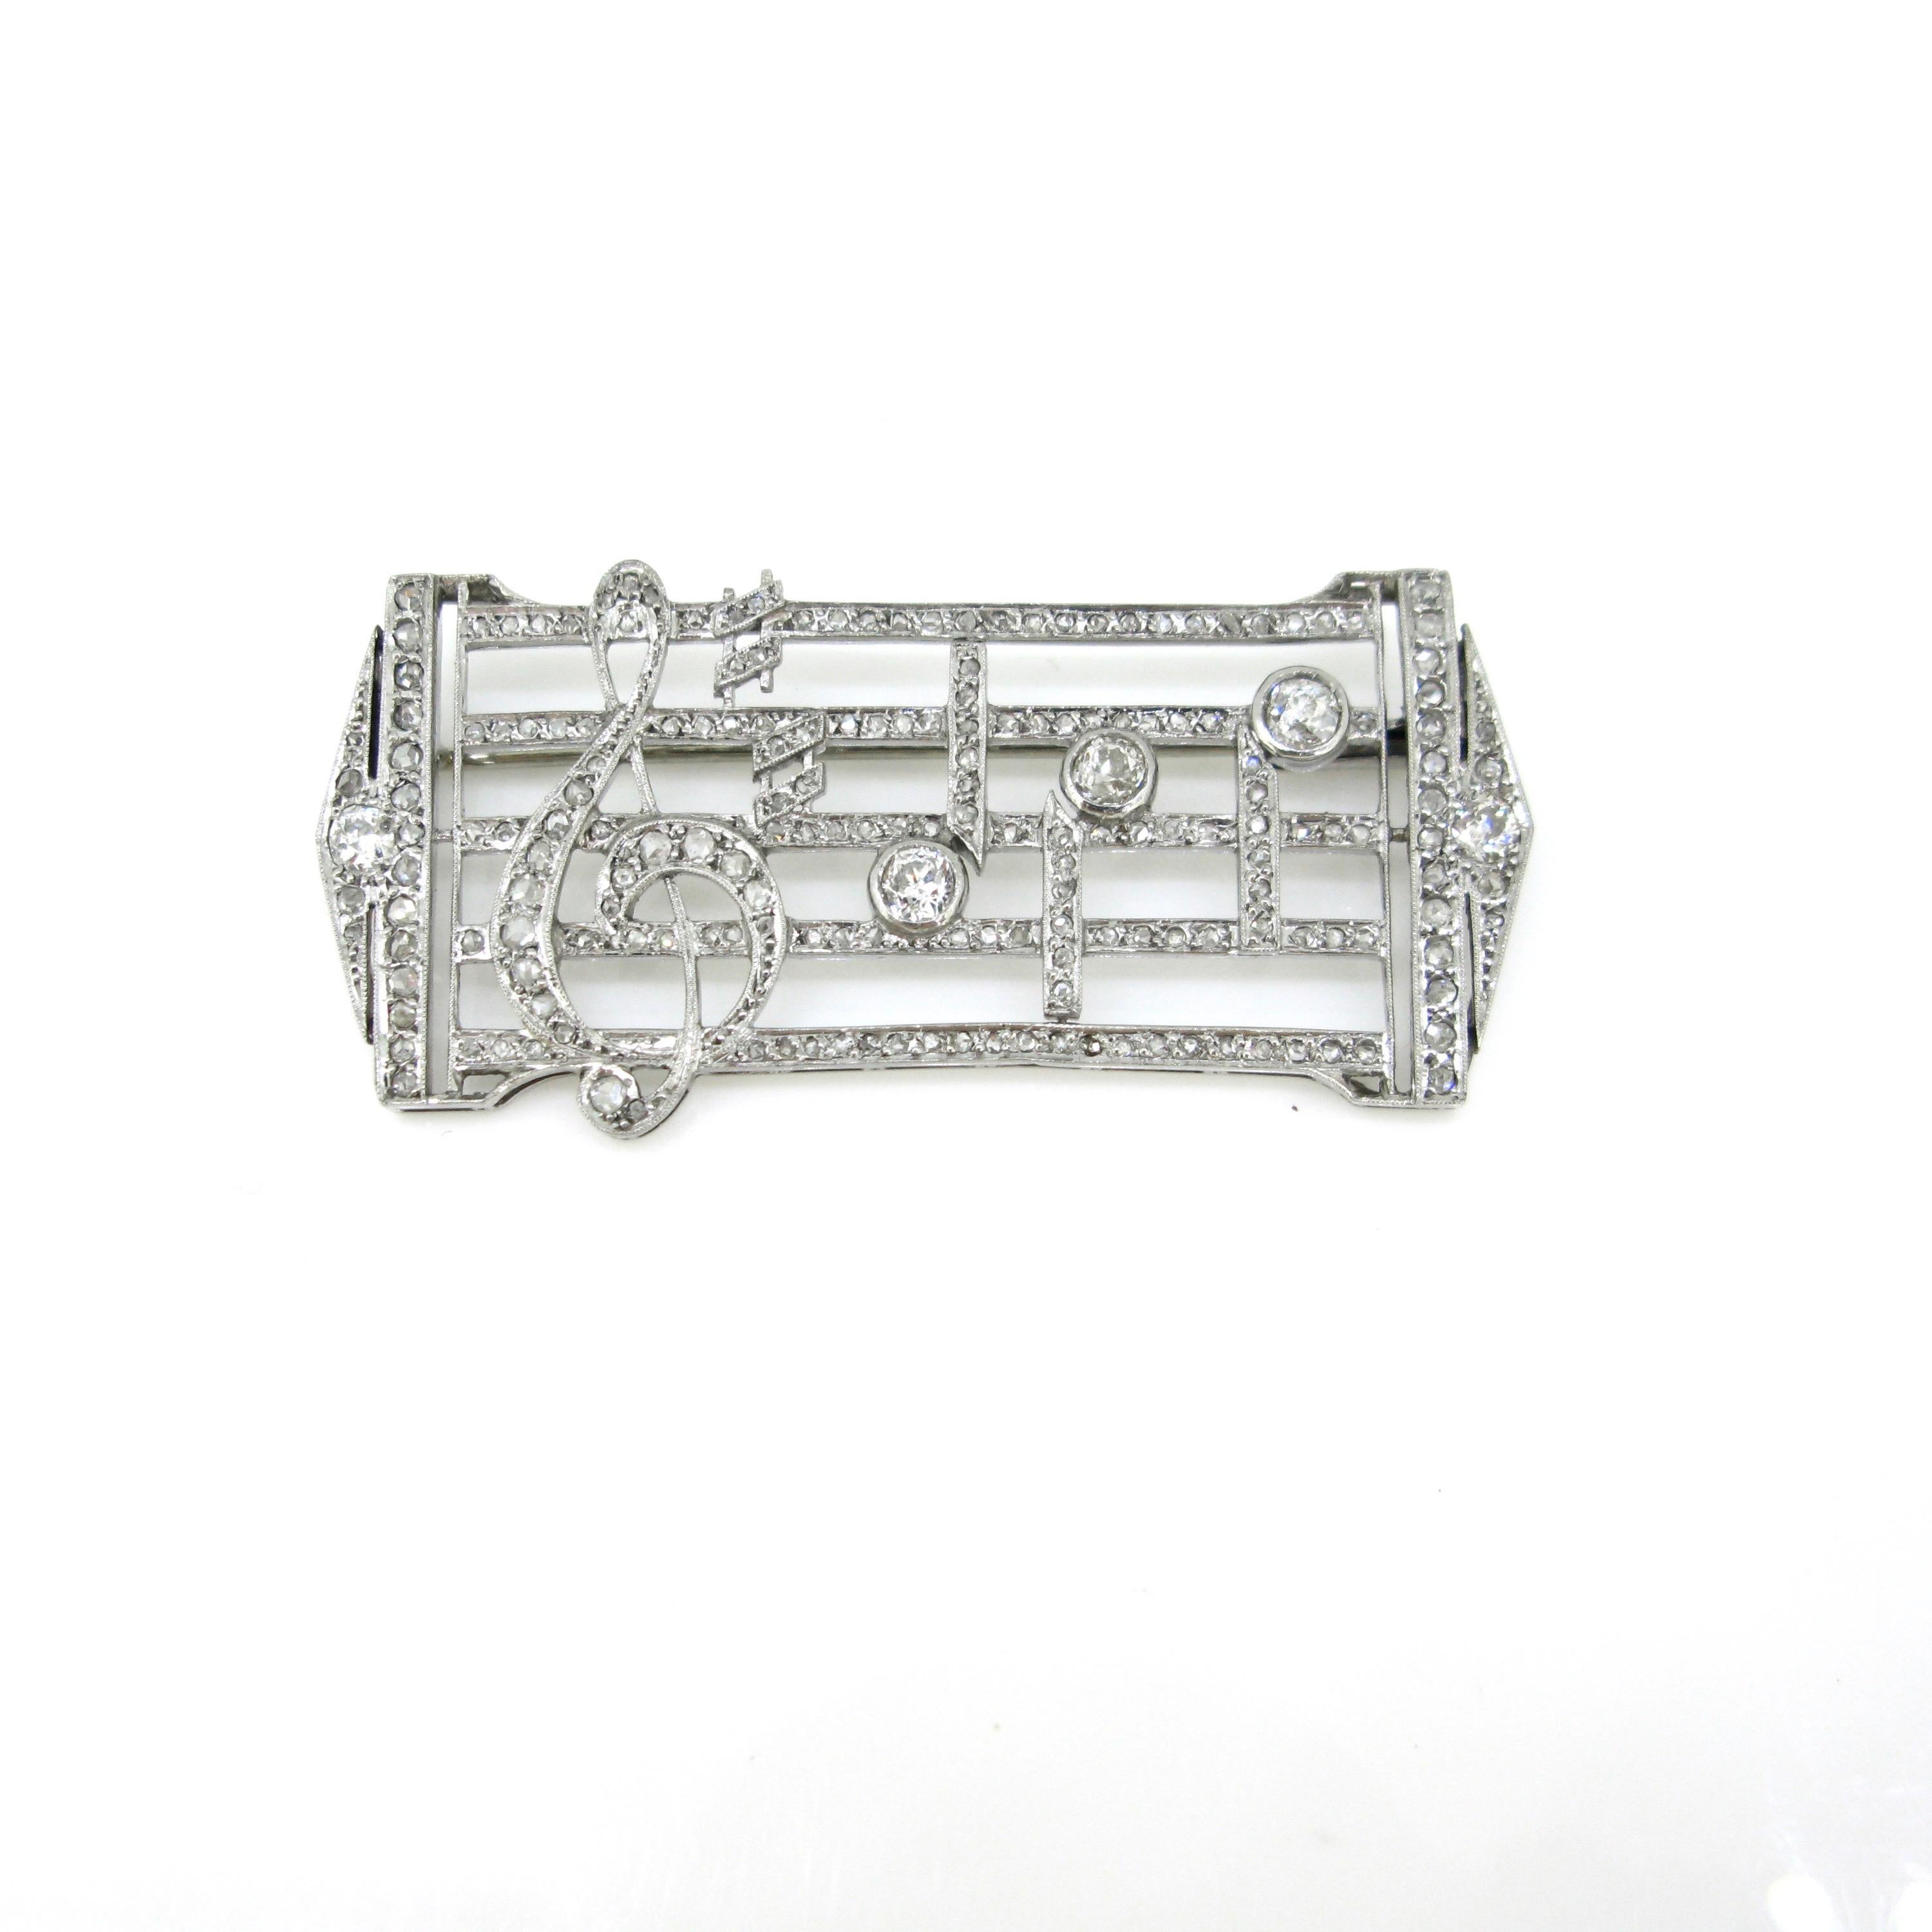 This brooch features a music score with the treble clef, 2 hashes and 3 notes. It was made in platinum and adorned with old mine cut diamonds and rose cut (colour: I/J – clarity: VS/SI) There is an approximate total carat weight of 0.70ct for the 5